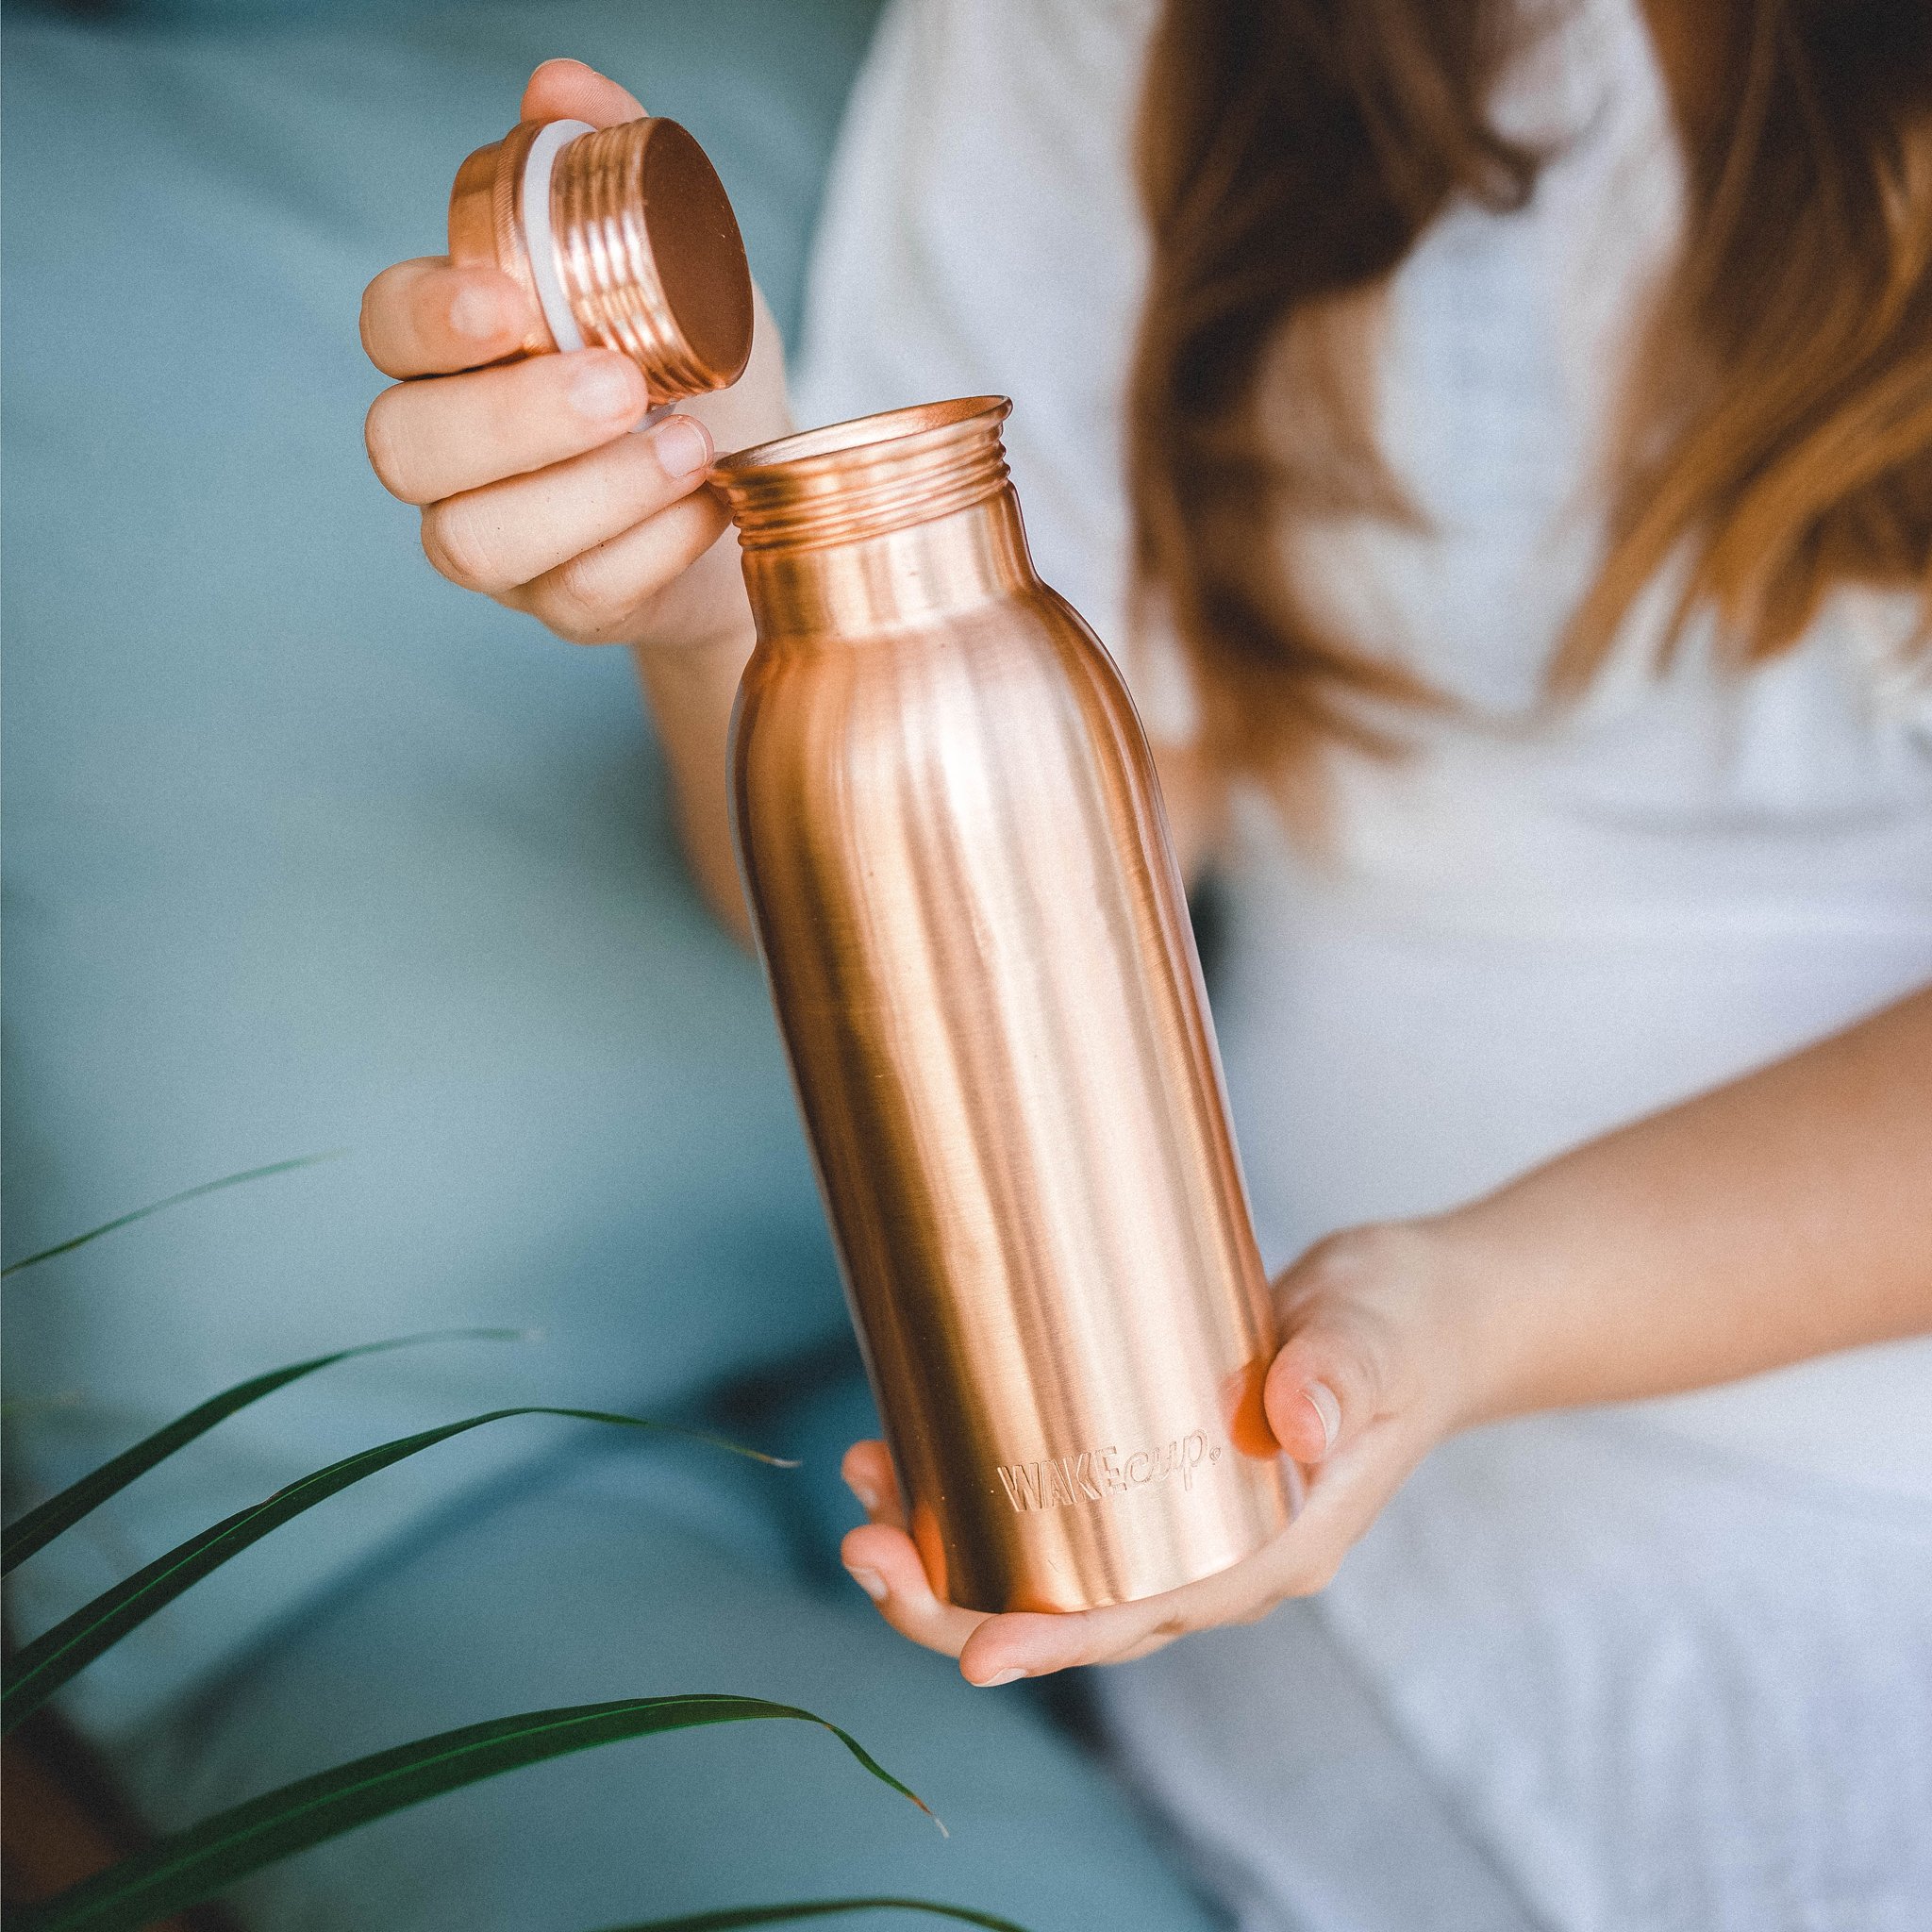 https://ecofaye.com/wp-content/uploads/2020/10/Our-Guide-to-making-the-switch-to-a-Reusable-Water-Bottle-cover.jpg